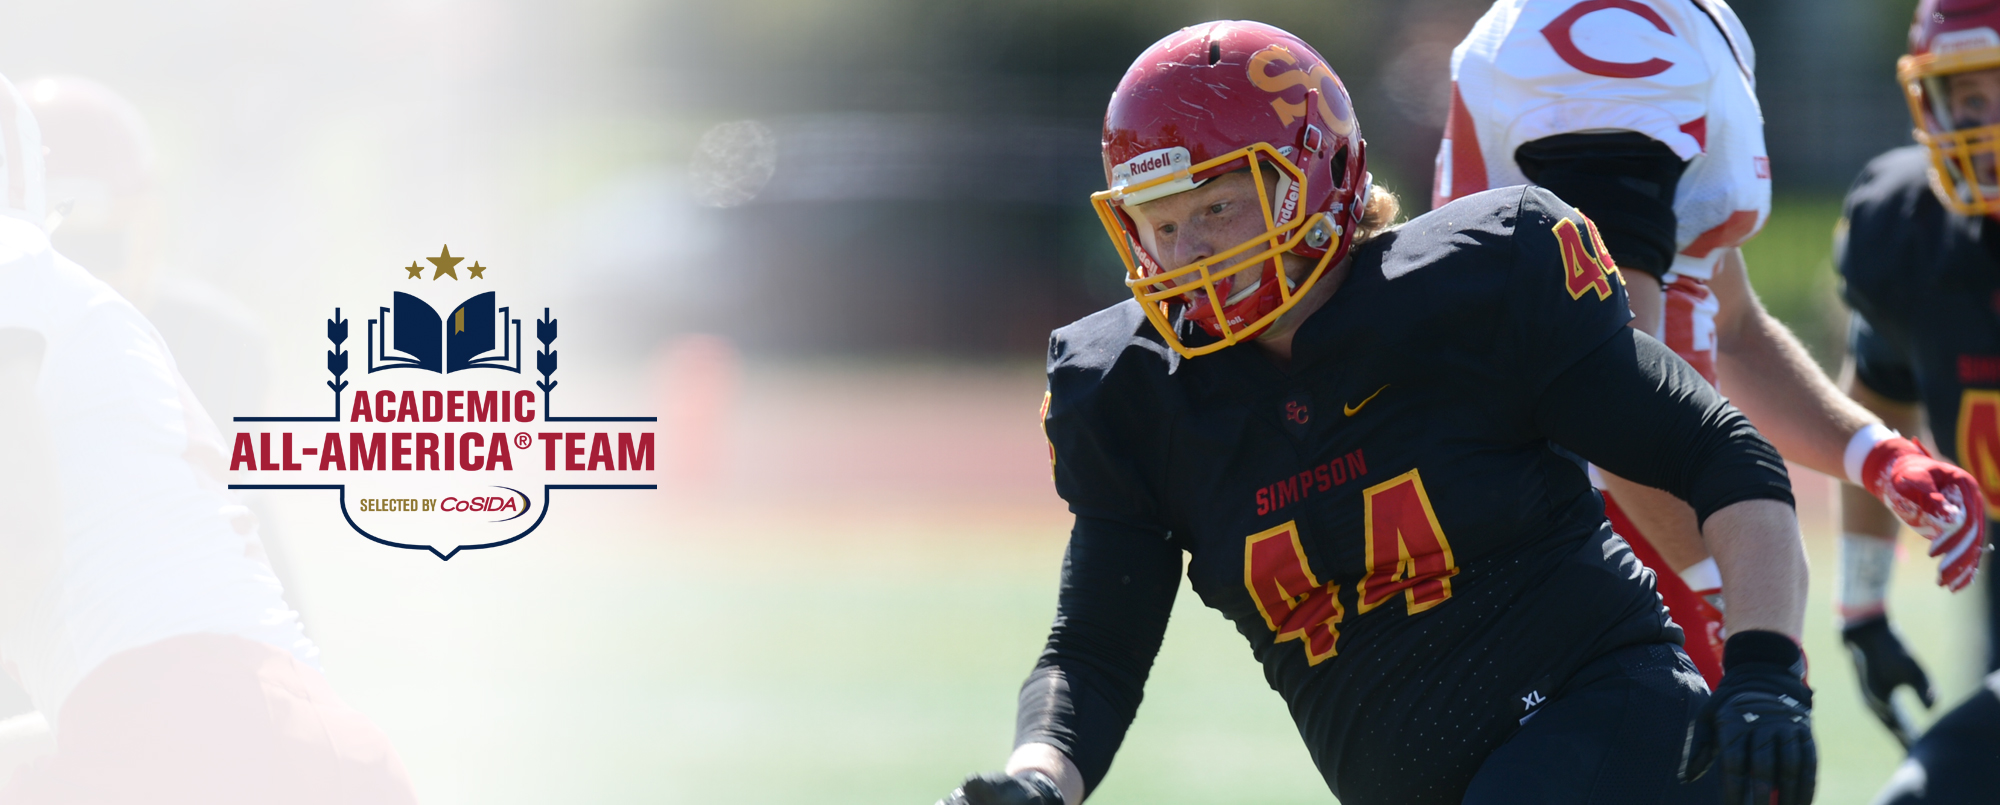 Jake Stearns has been named a CoSIDA Academic All-American for the 2017 season.